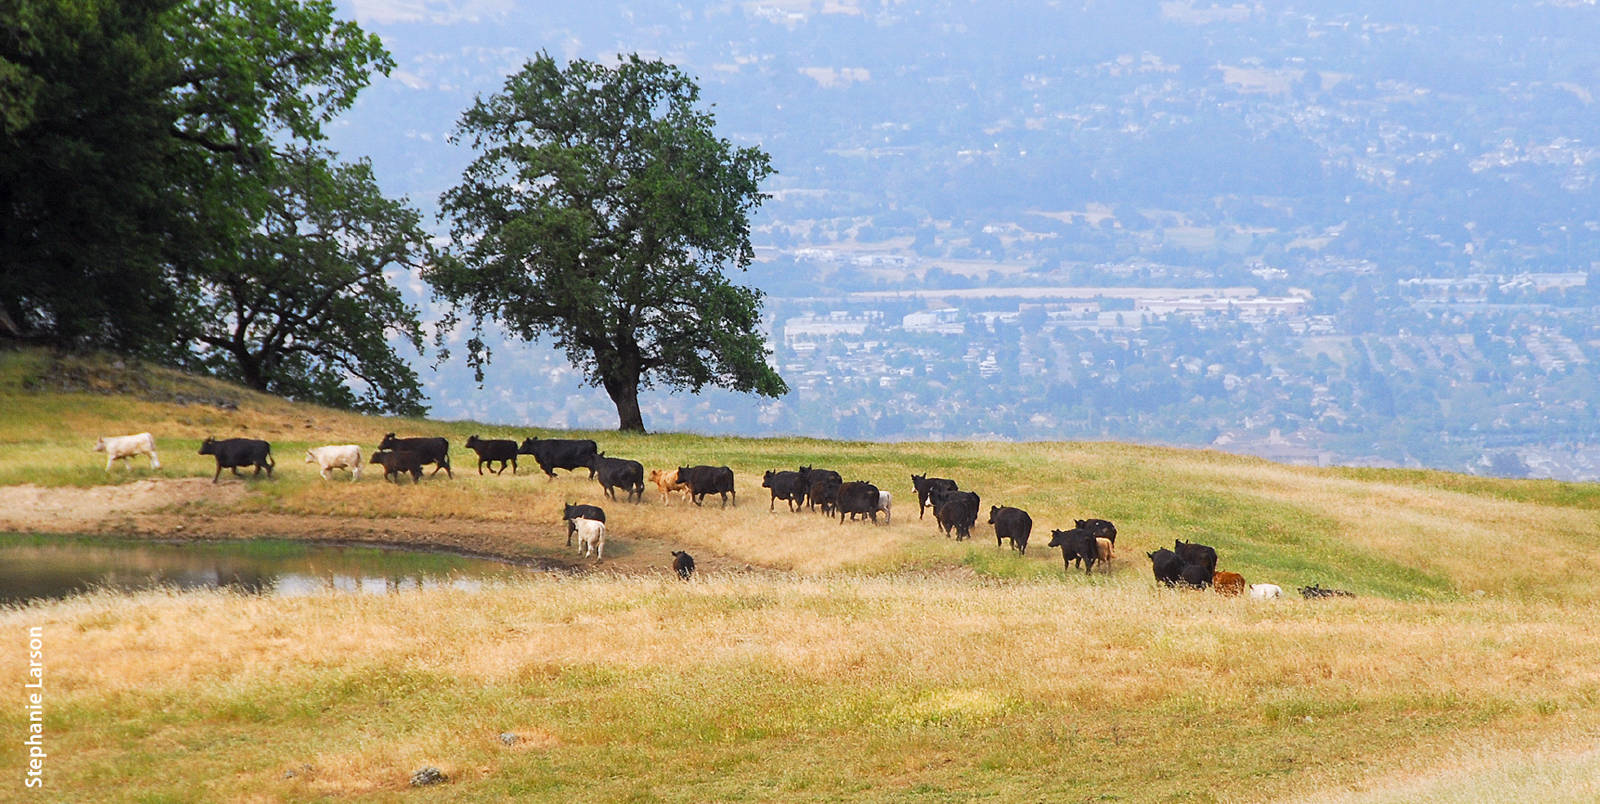 The study assessed four ecosystem services provided by Sonoma County landscapes: carbon storage, sediment retention, nutrient retention and water yield.